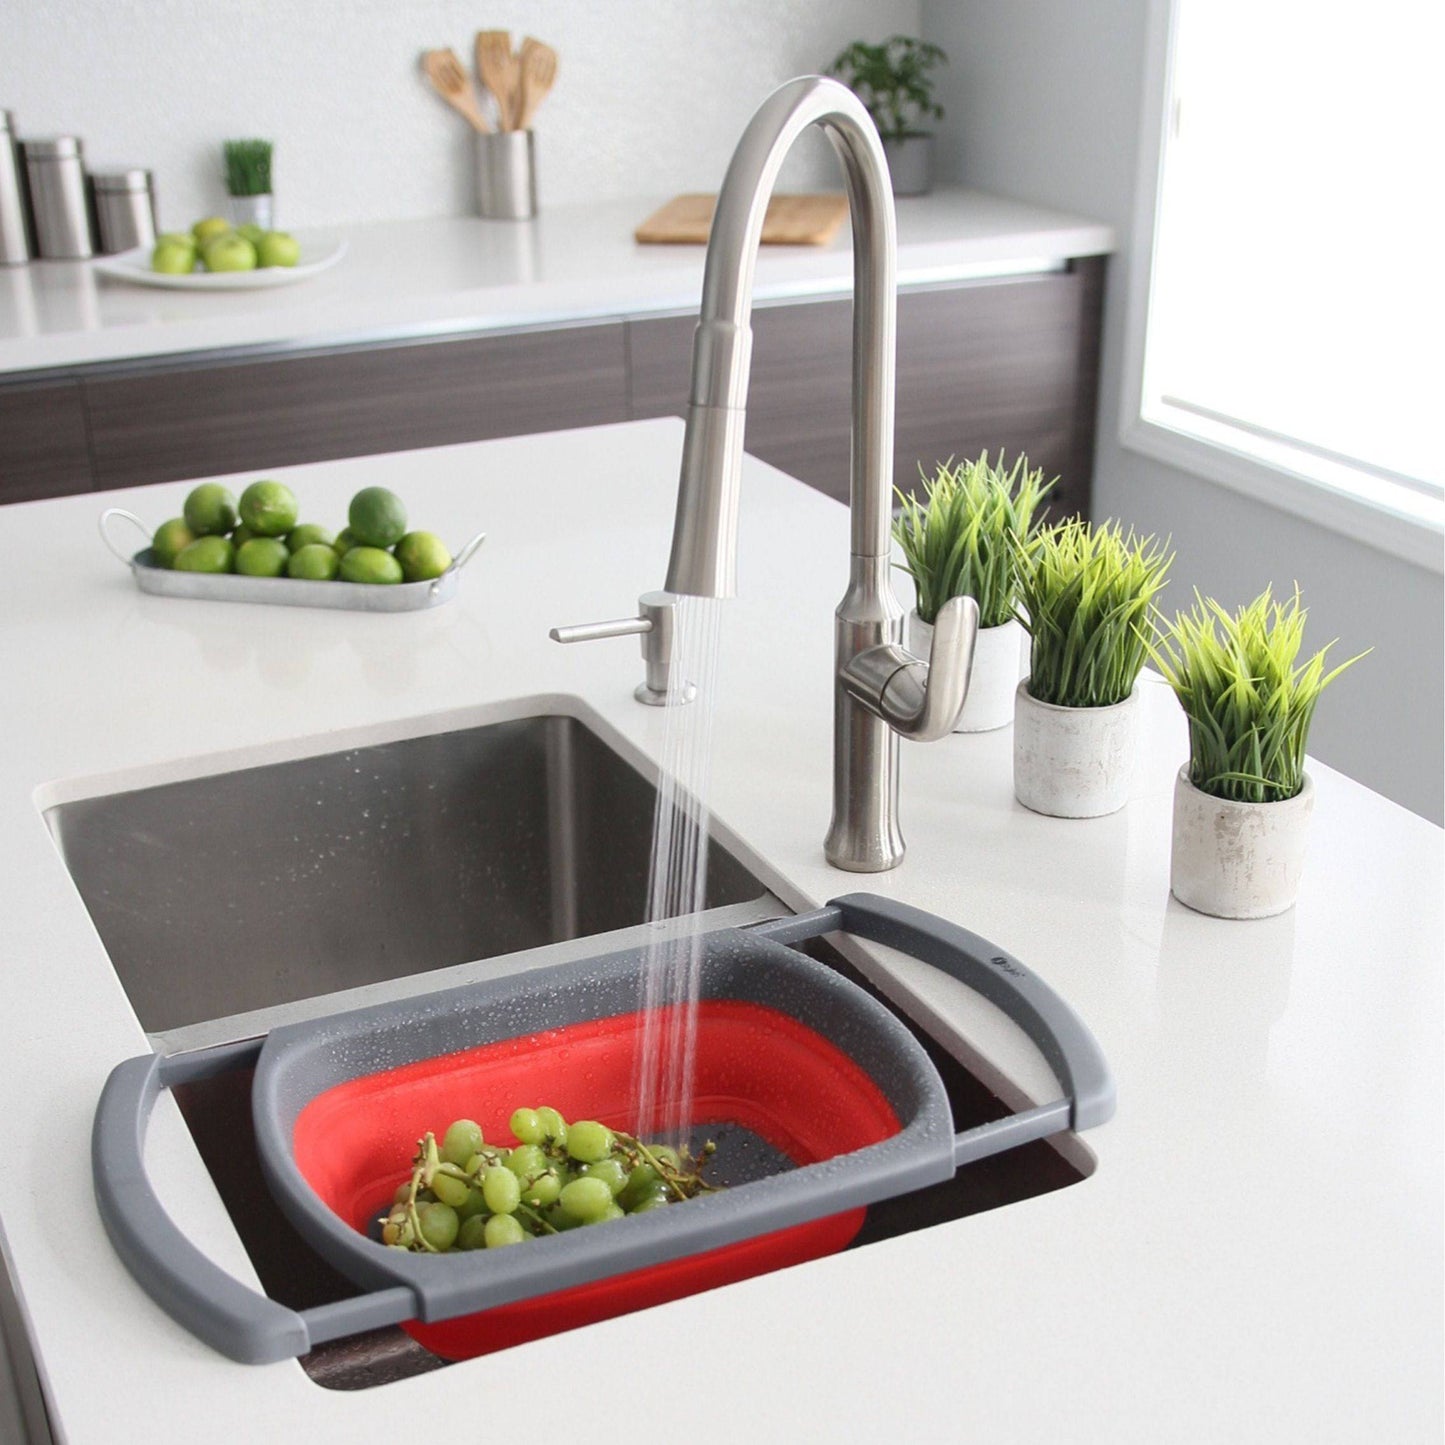 Stylish 13" Collapsible Over the Sink Colander A-905